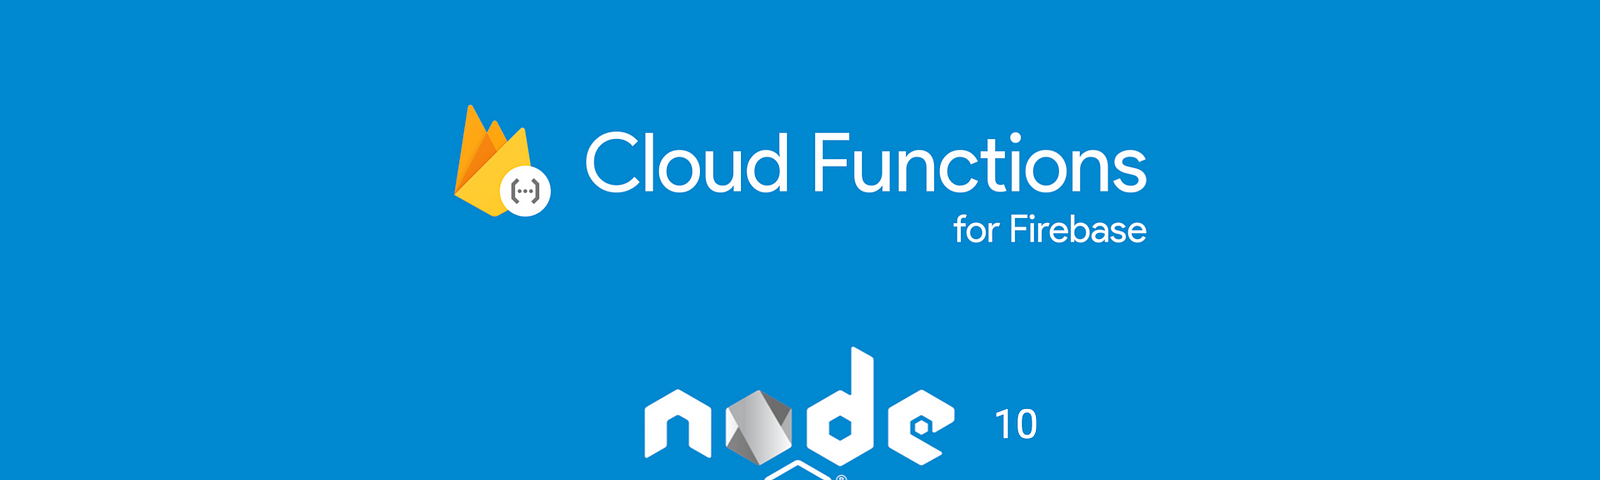 Cloud Functions for Firebase and Node.js logos